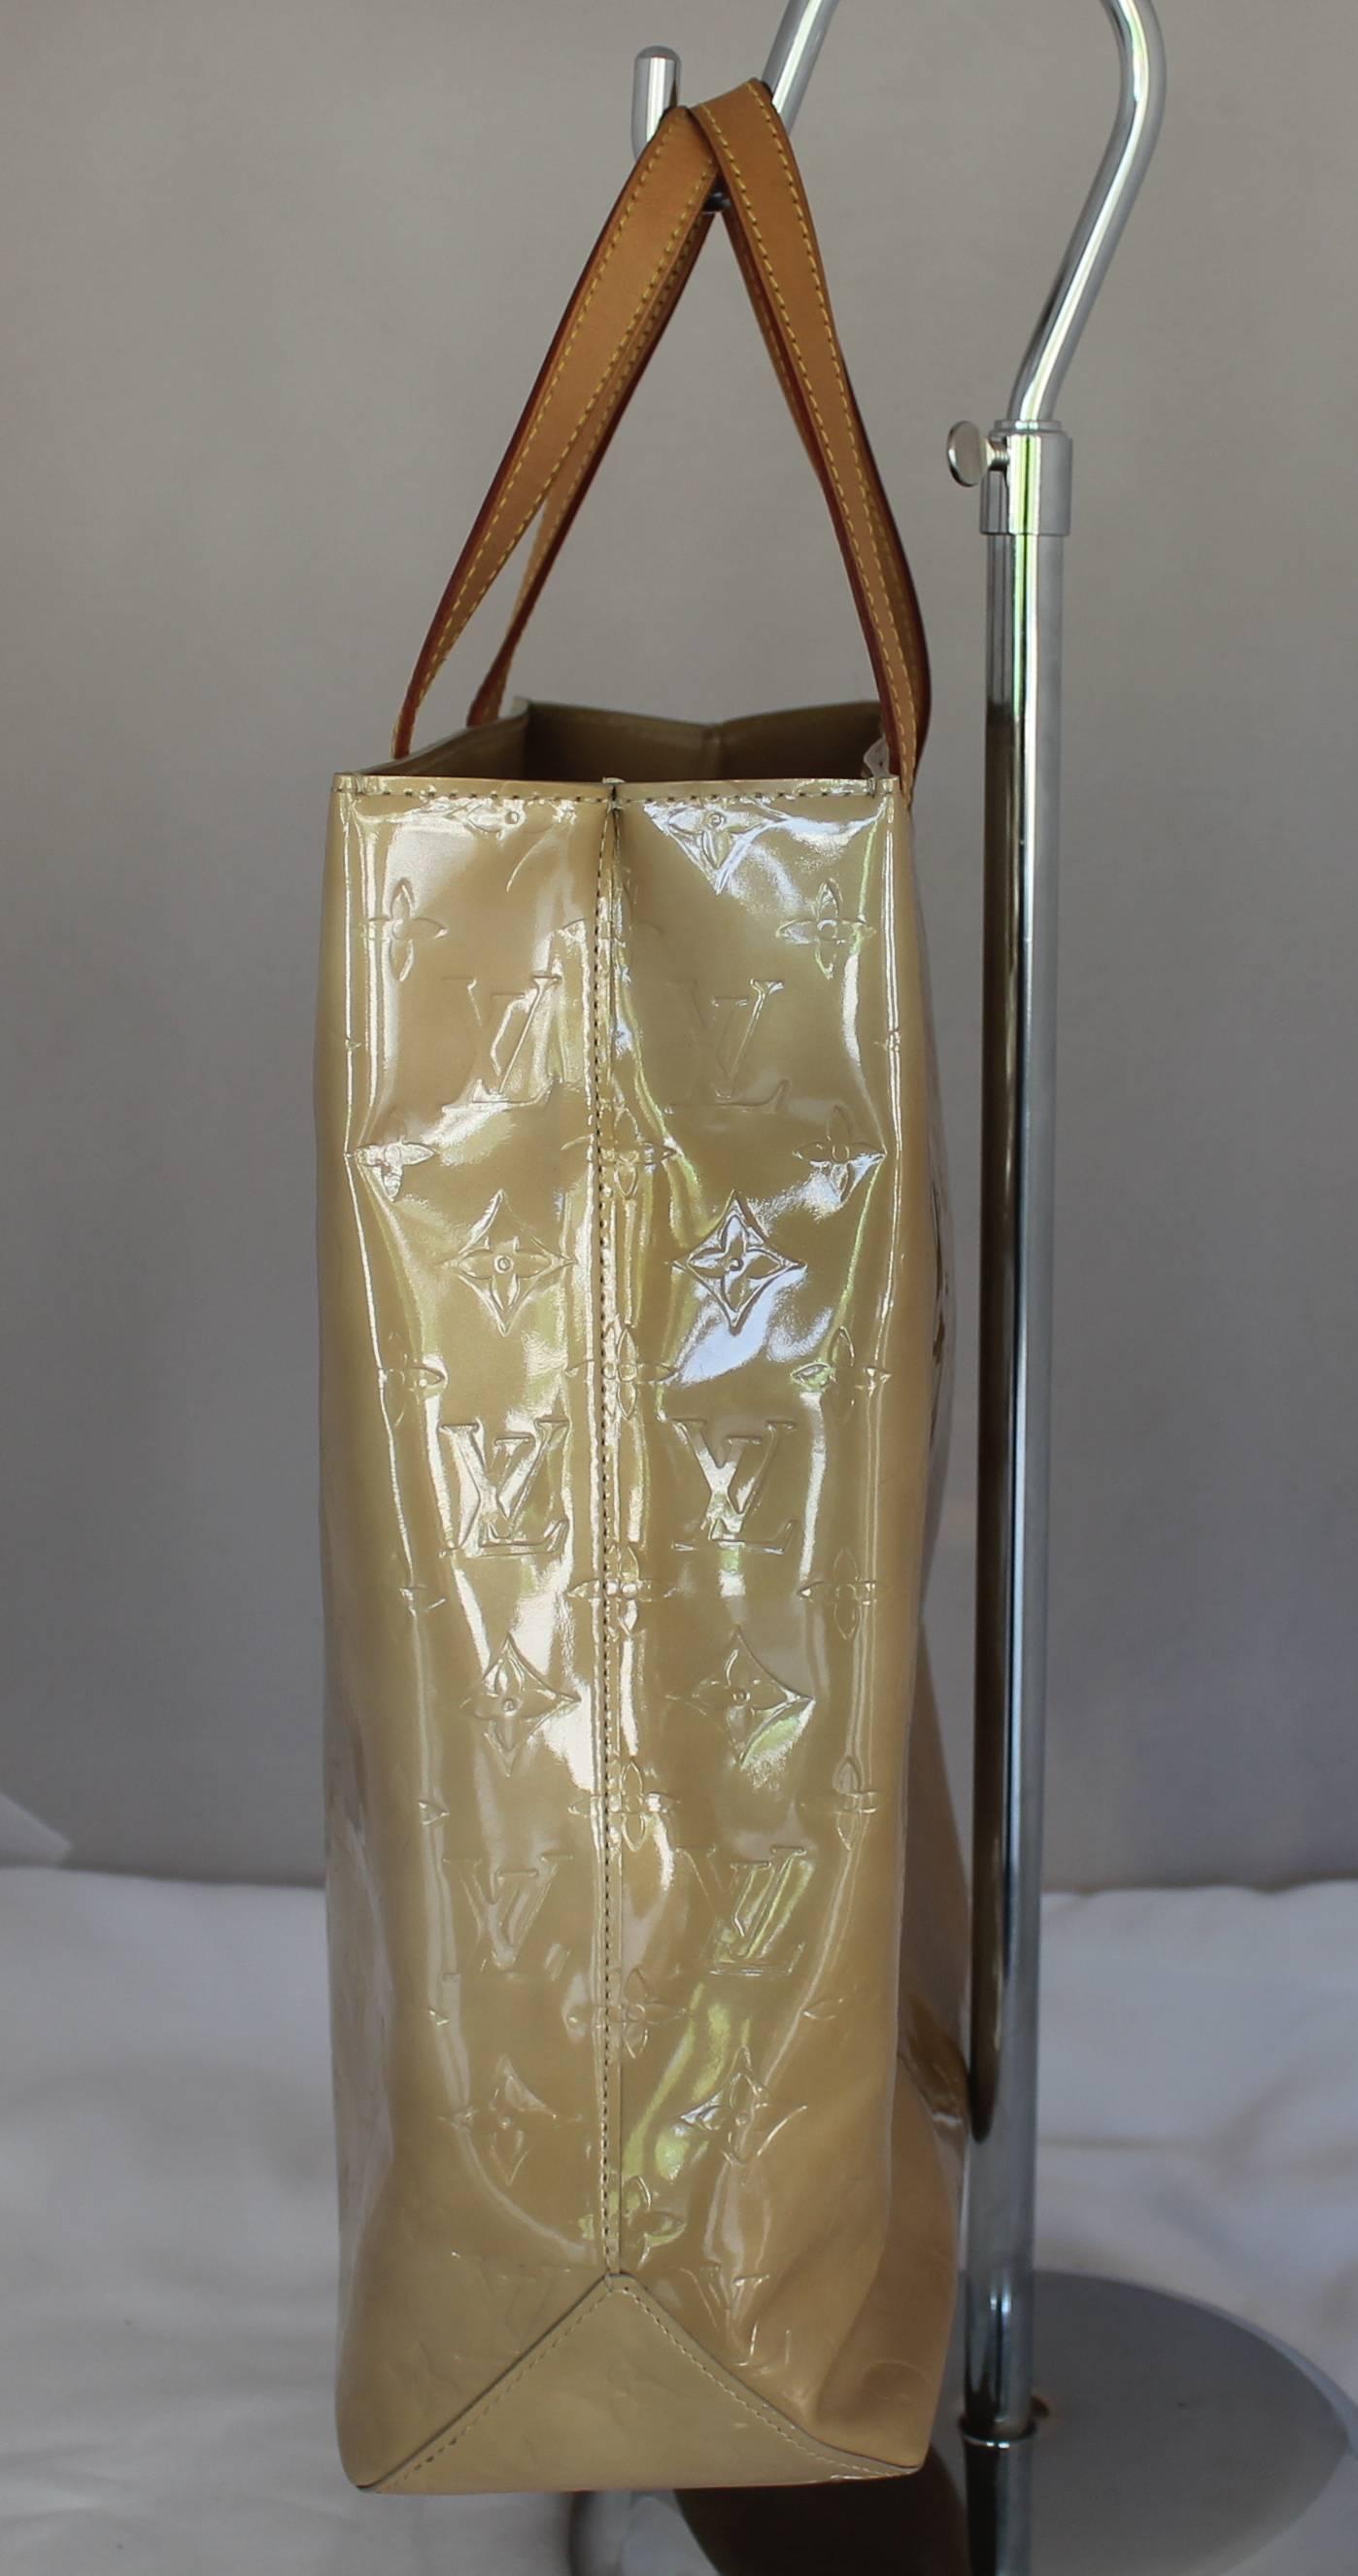 Louis Vuitton Mustard Vernis Reade MM Long Tote - circa 2001 . This bag is in very good condition with minor wear on the patent and leather. The bag has 2 luggage leather handles and has 1 small zip pocket on the inside.

Measurements:
Height-